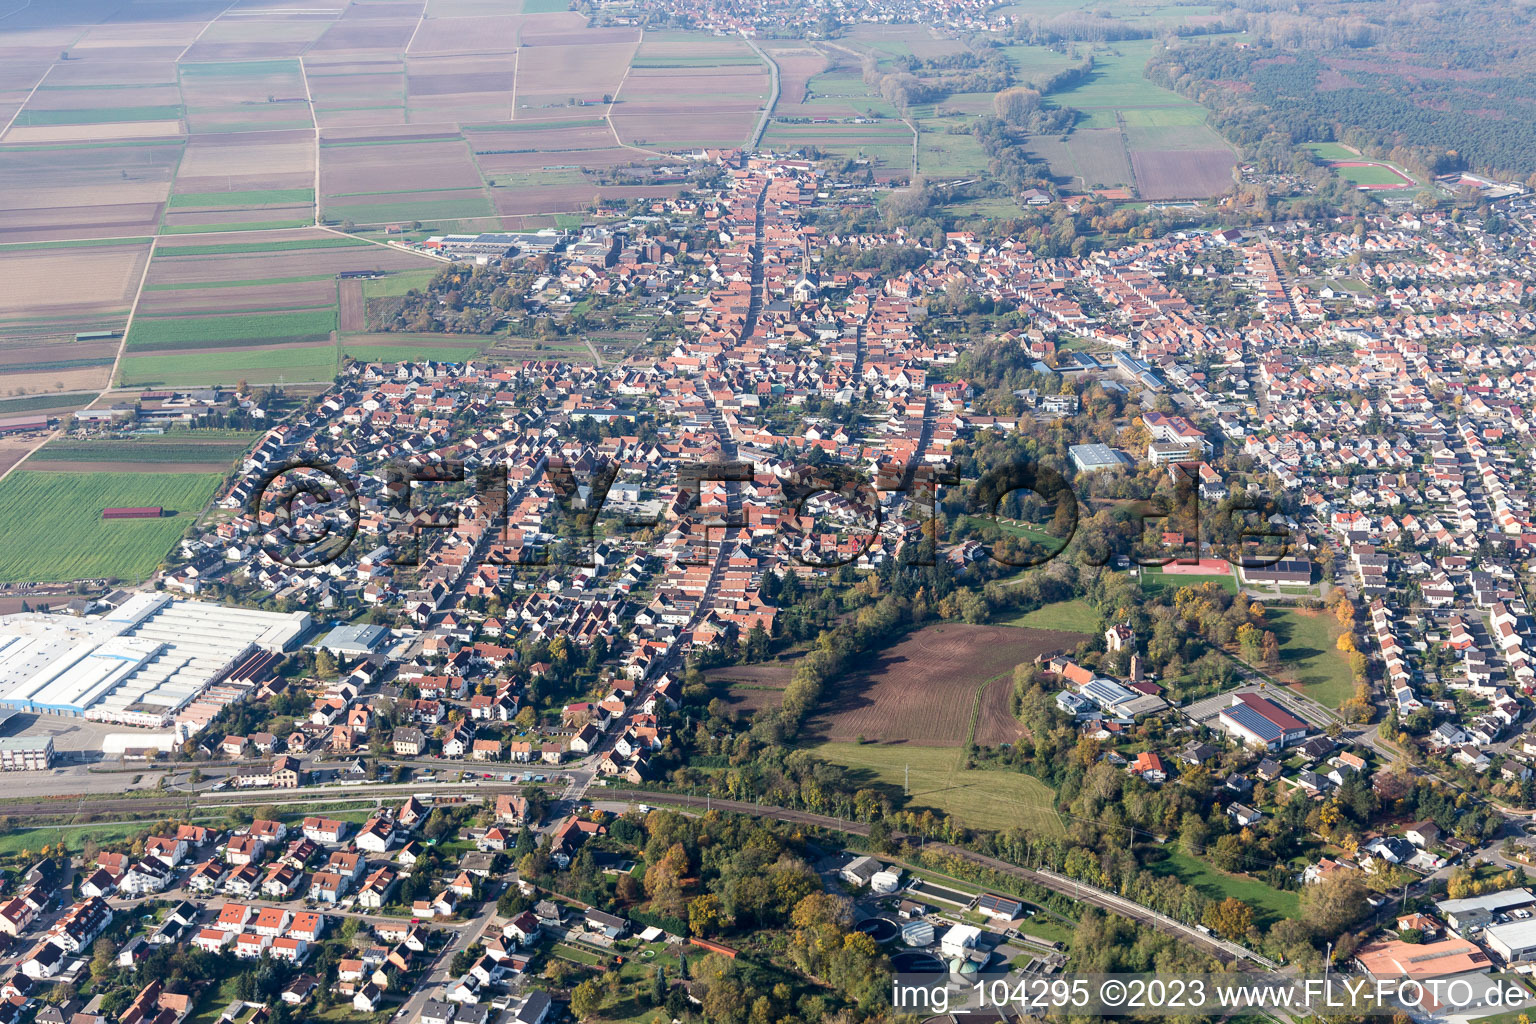 Bellheim in the state Rhineland-Palatinate, Germany seen from a drone